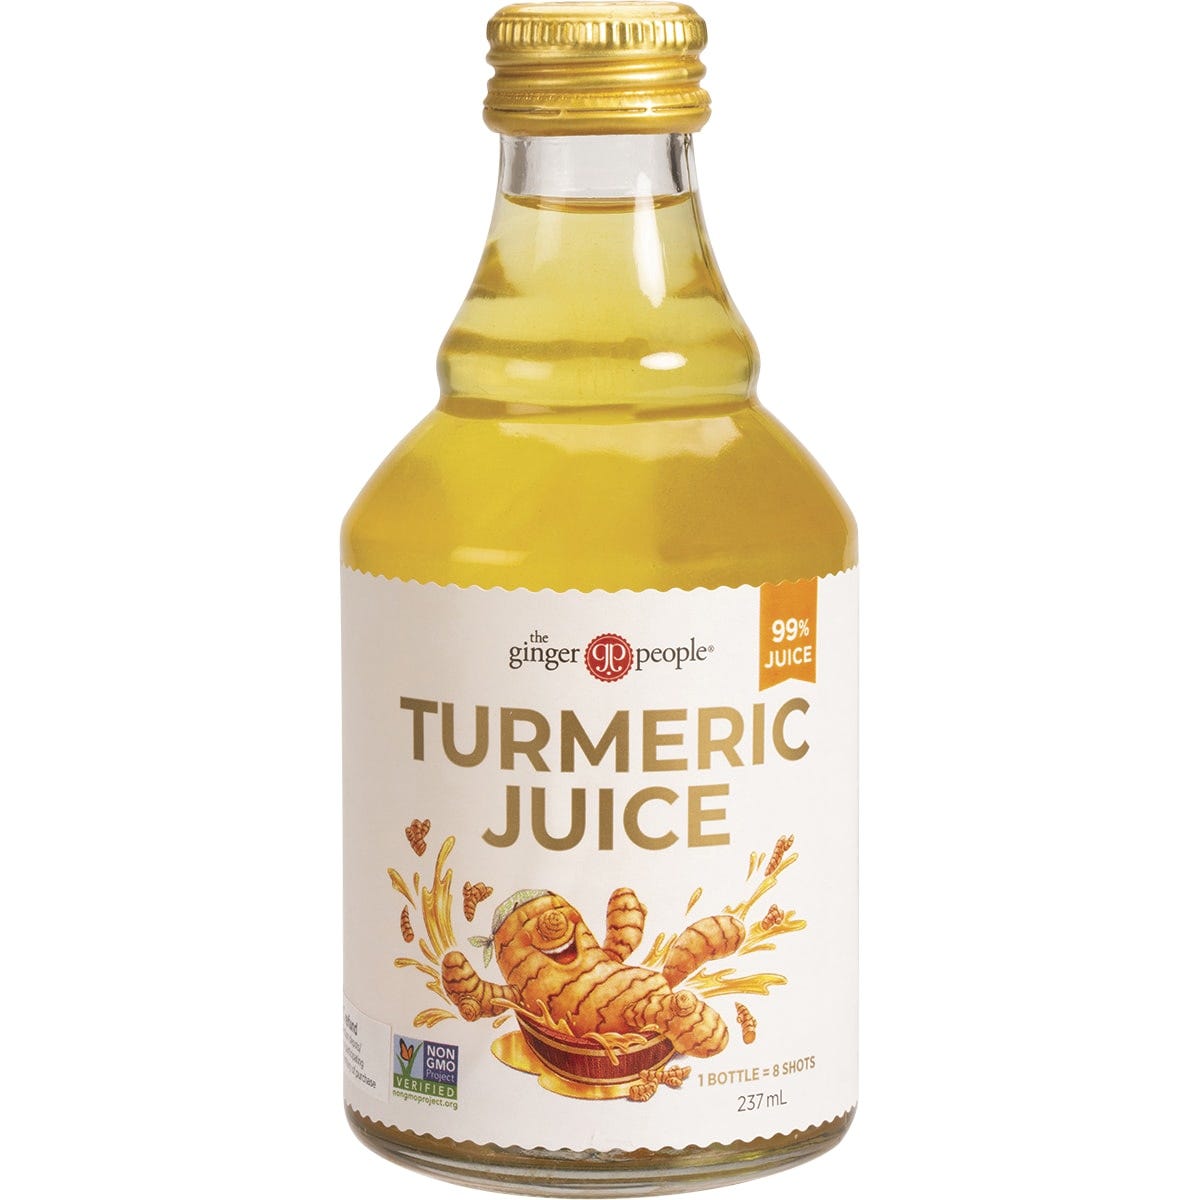 The Ginger People Turmeric Juice 99% Juice 237ml - Dr Earth - Drinks